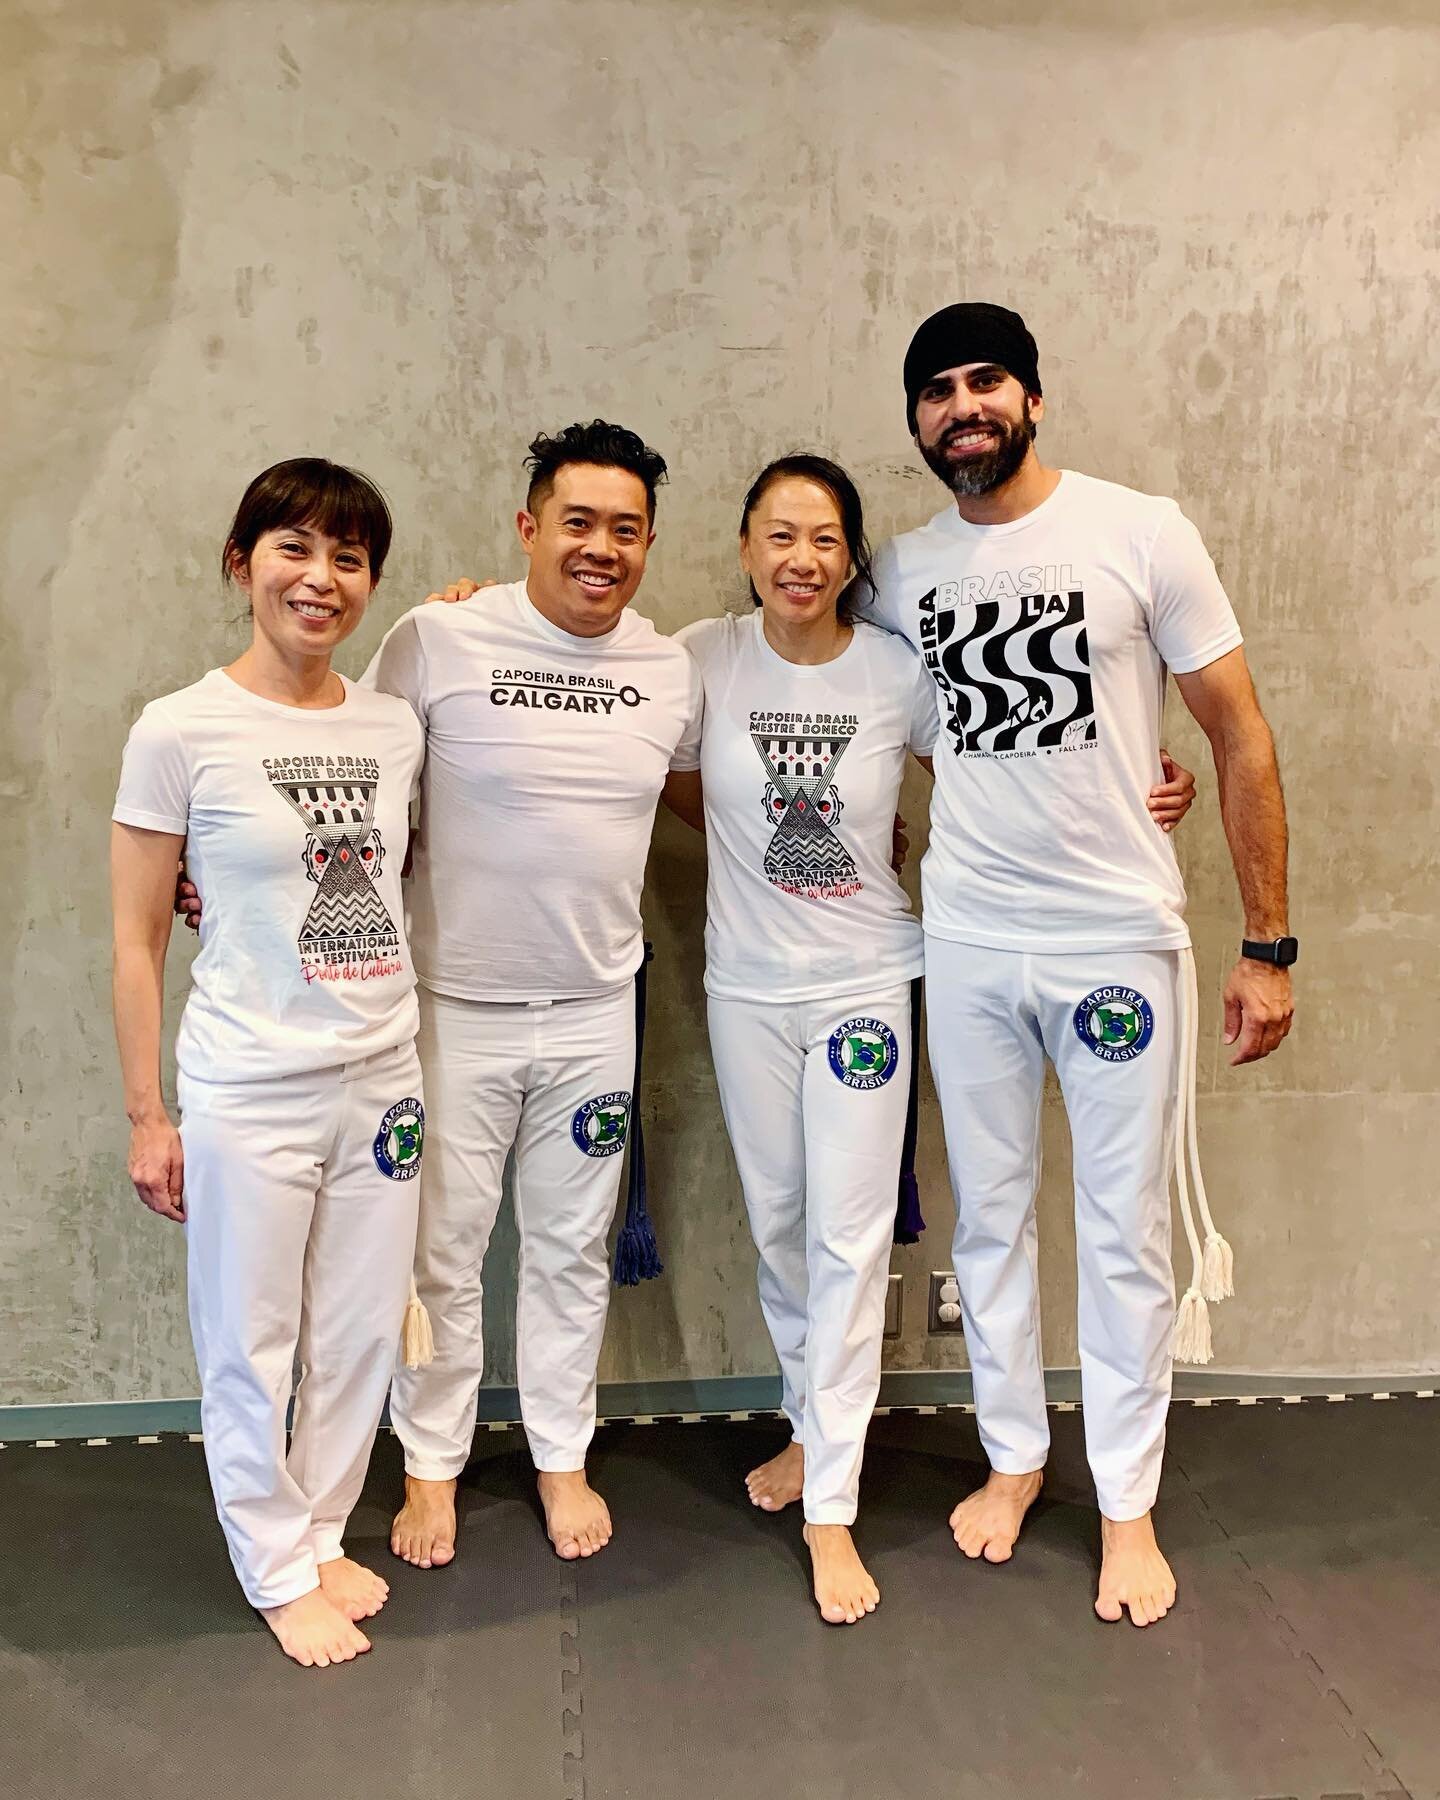 First class back with some fresh new uniforms&hellip; hot off the press from L.A! 😍🤸🏻🔥 

Grateful for our growing group of dedicated, wonderful individuals who show up every week to train hard, get out of their comfort zones and lift each other u